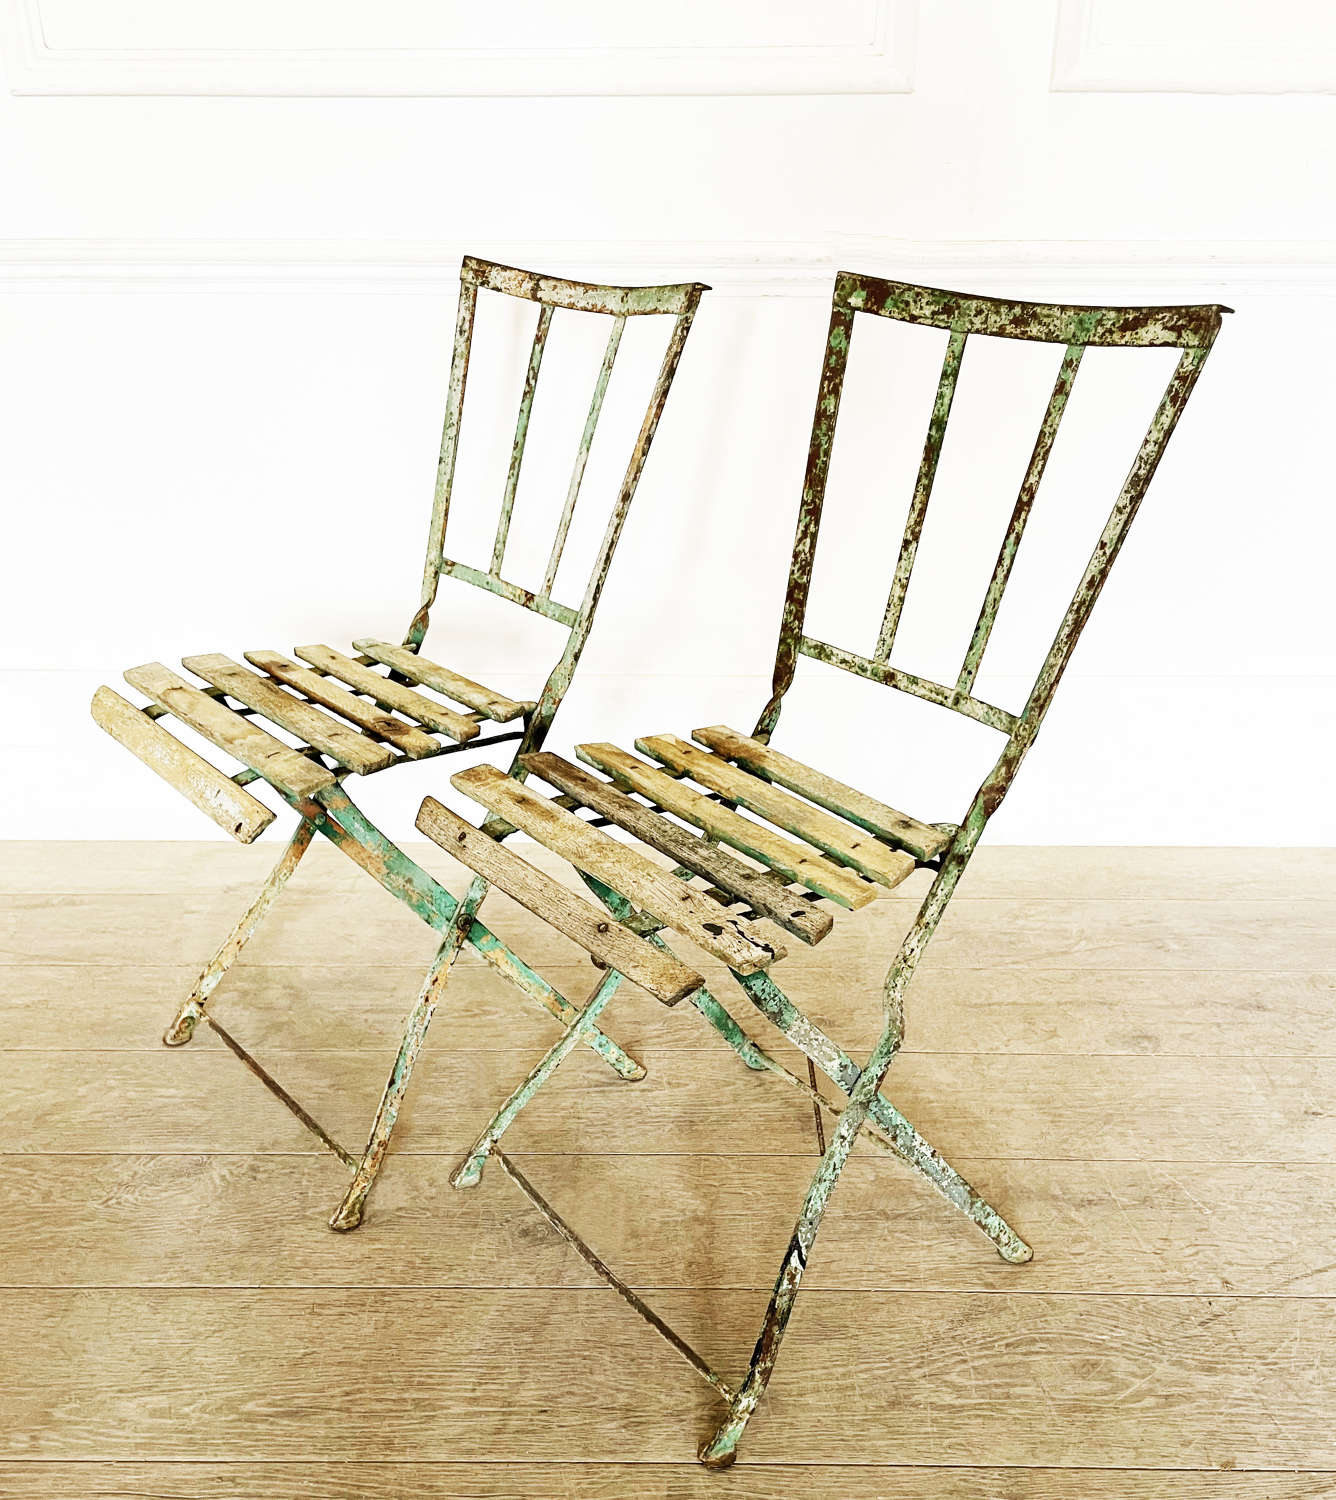 Pr. of French 20th century Folding Cafe Chairs - circa 1920